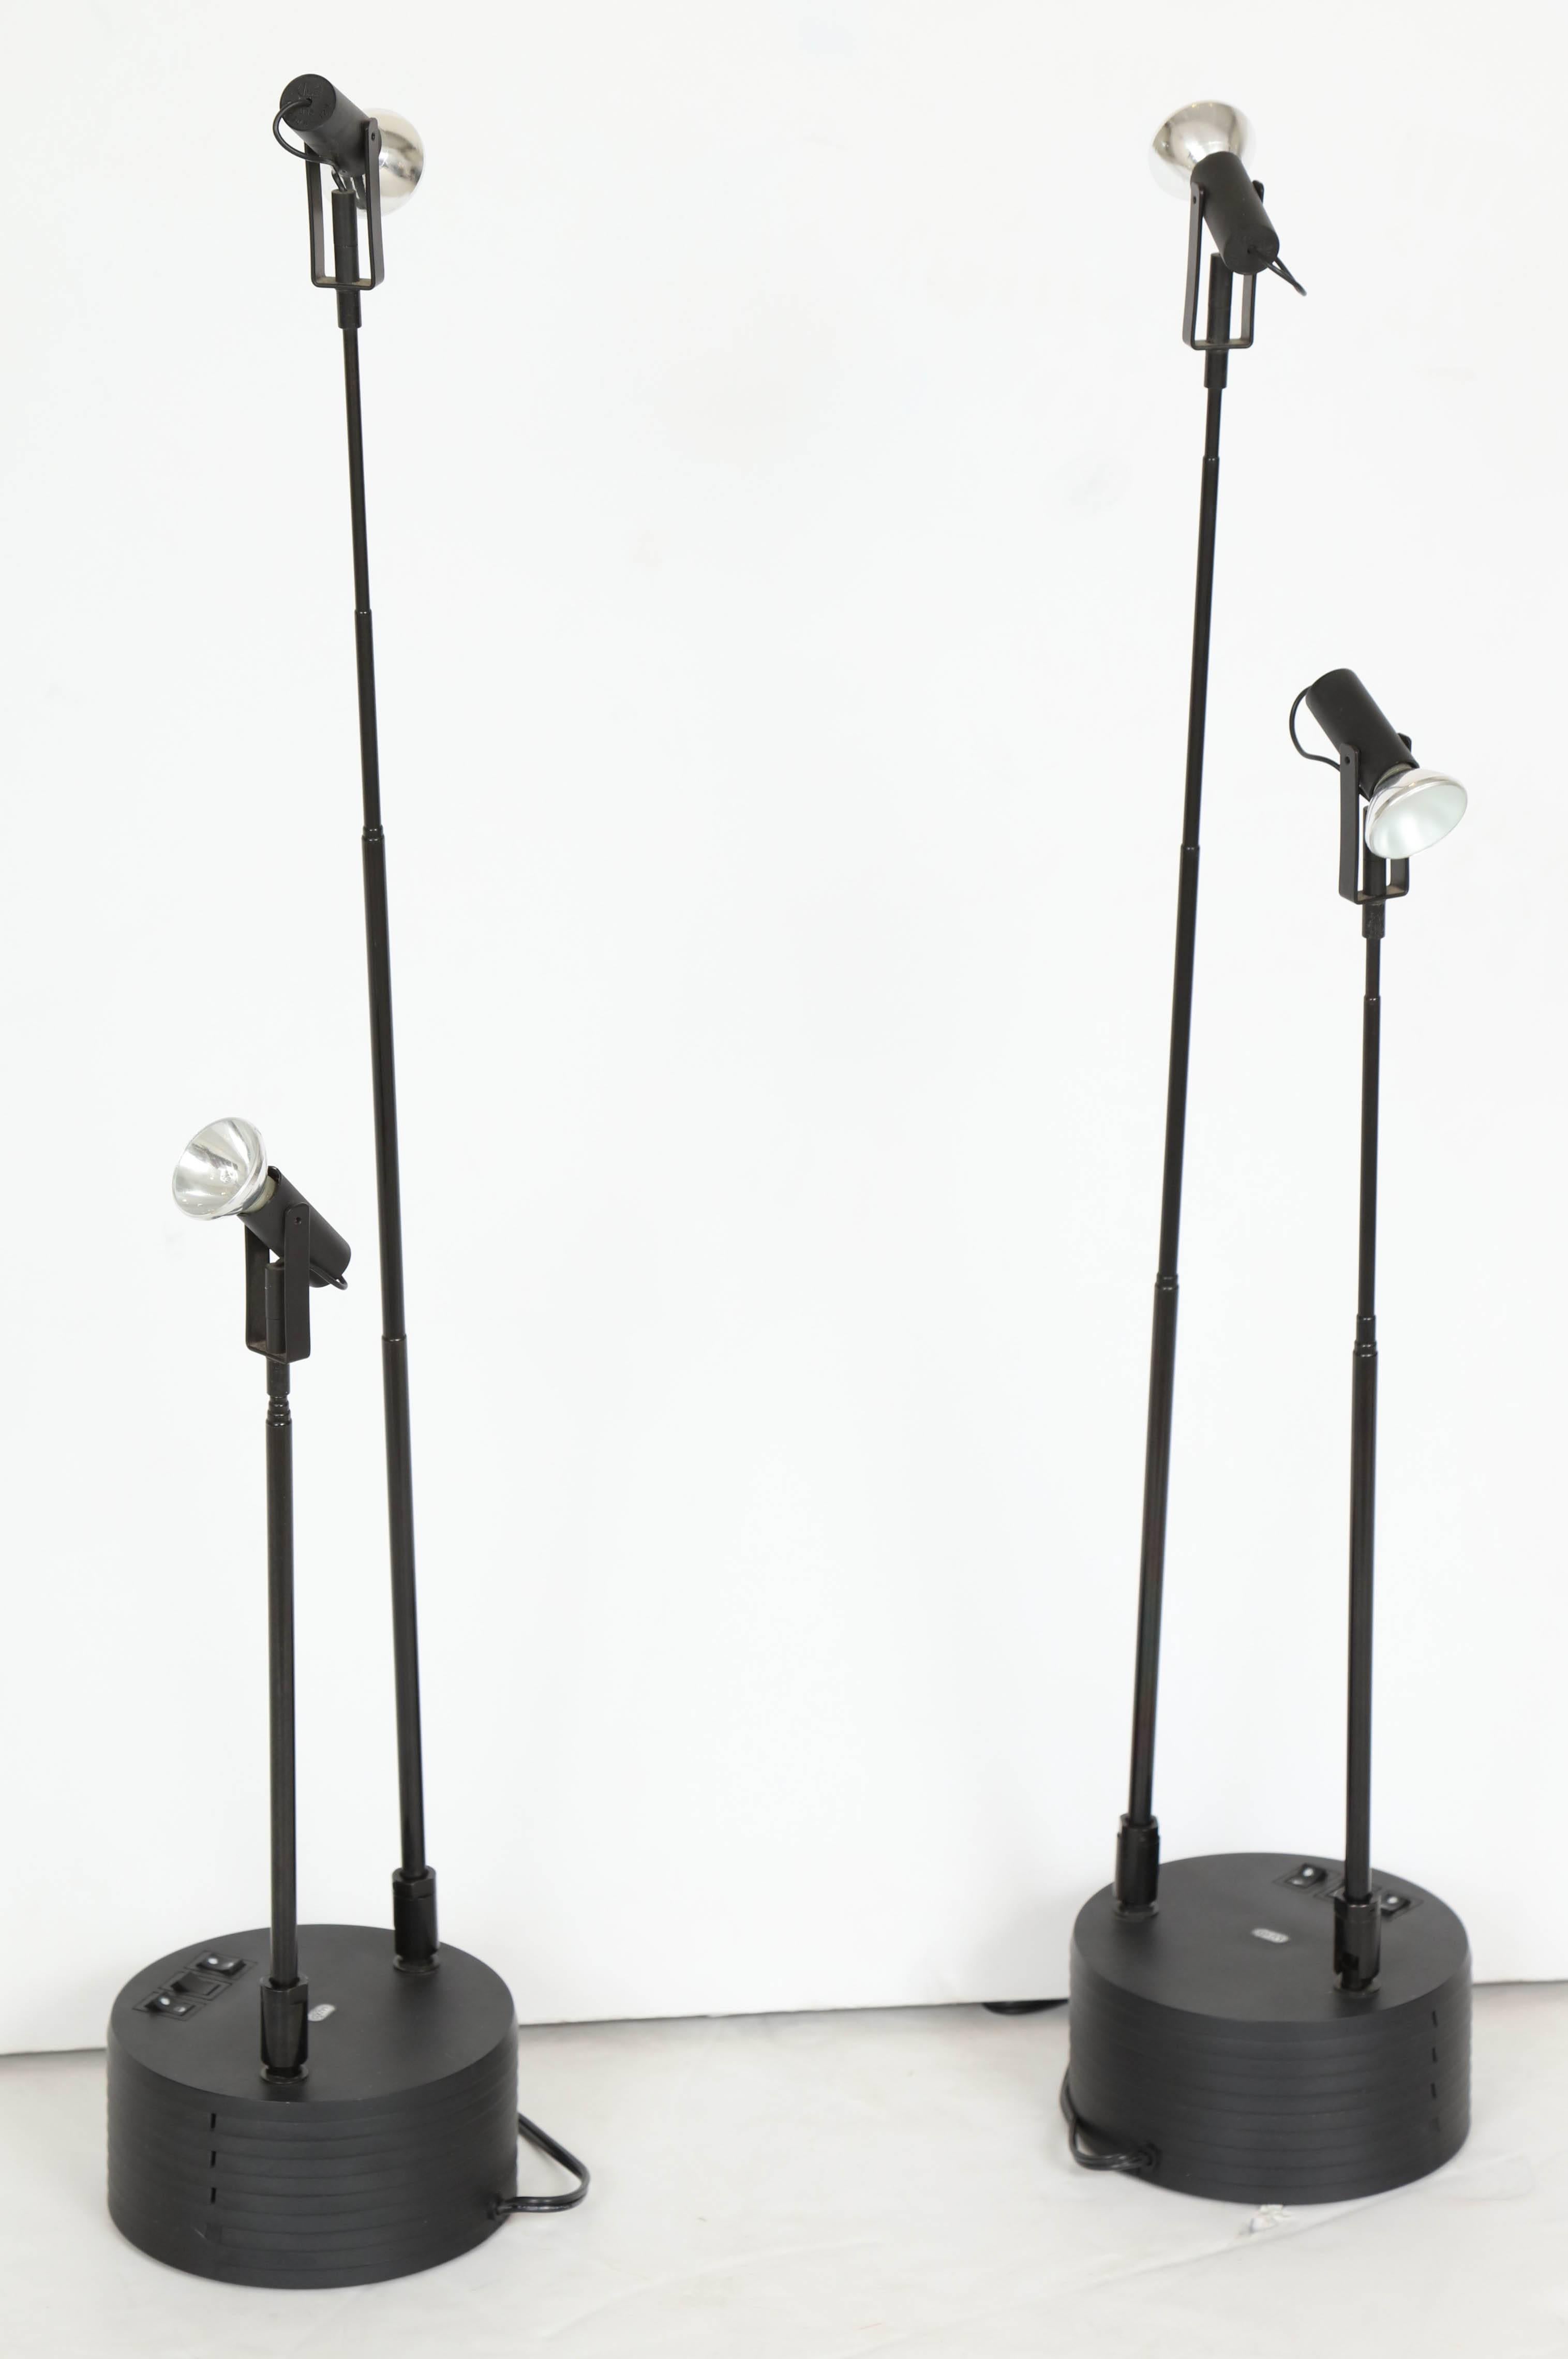 Black resin cylinder bases support two telescoping and articulating arms topped with miniature halogen reflector bulbs. Arms pivot at base and can be extended from 17 inches to a maximum of 41 inches as desired. Designed by Hans Ansems (Dutch, b